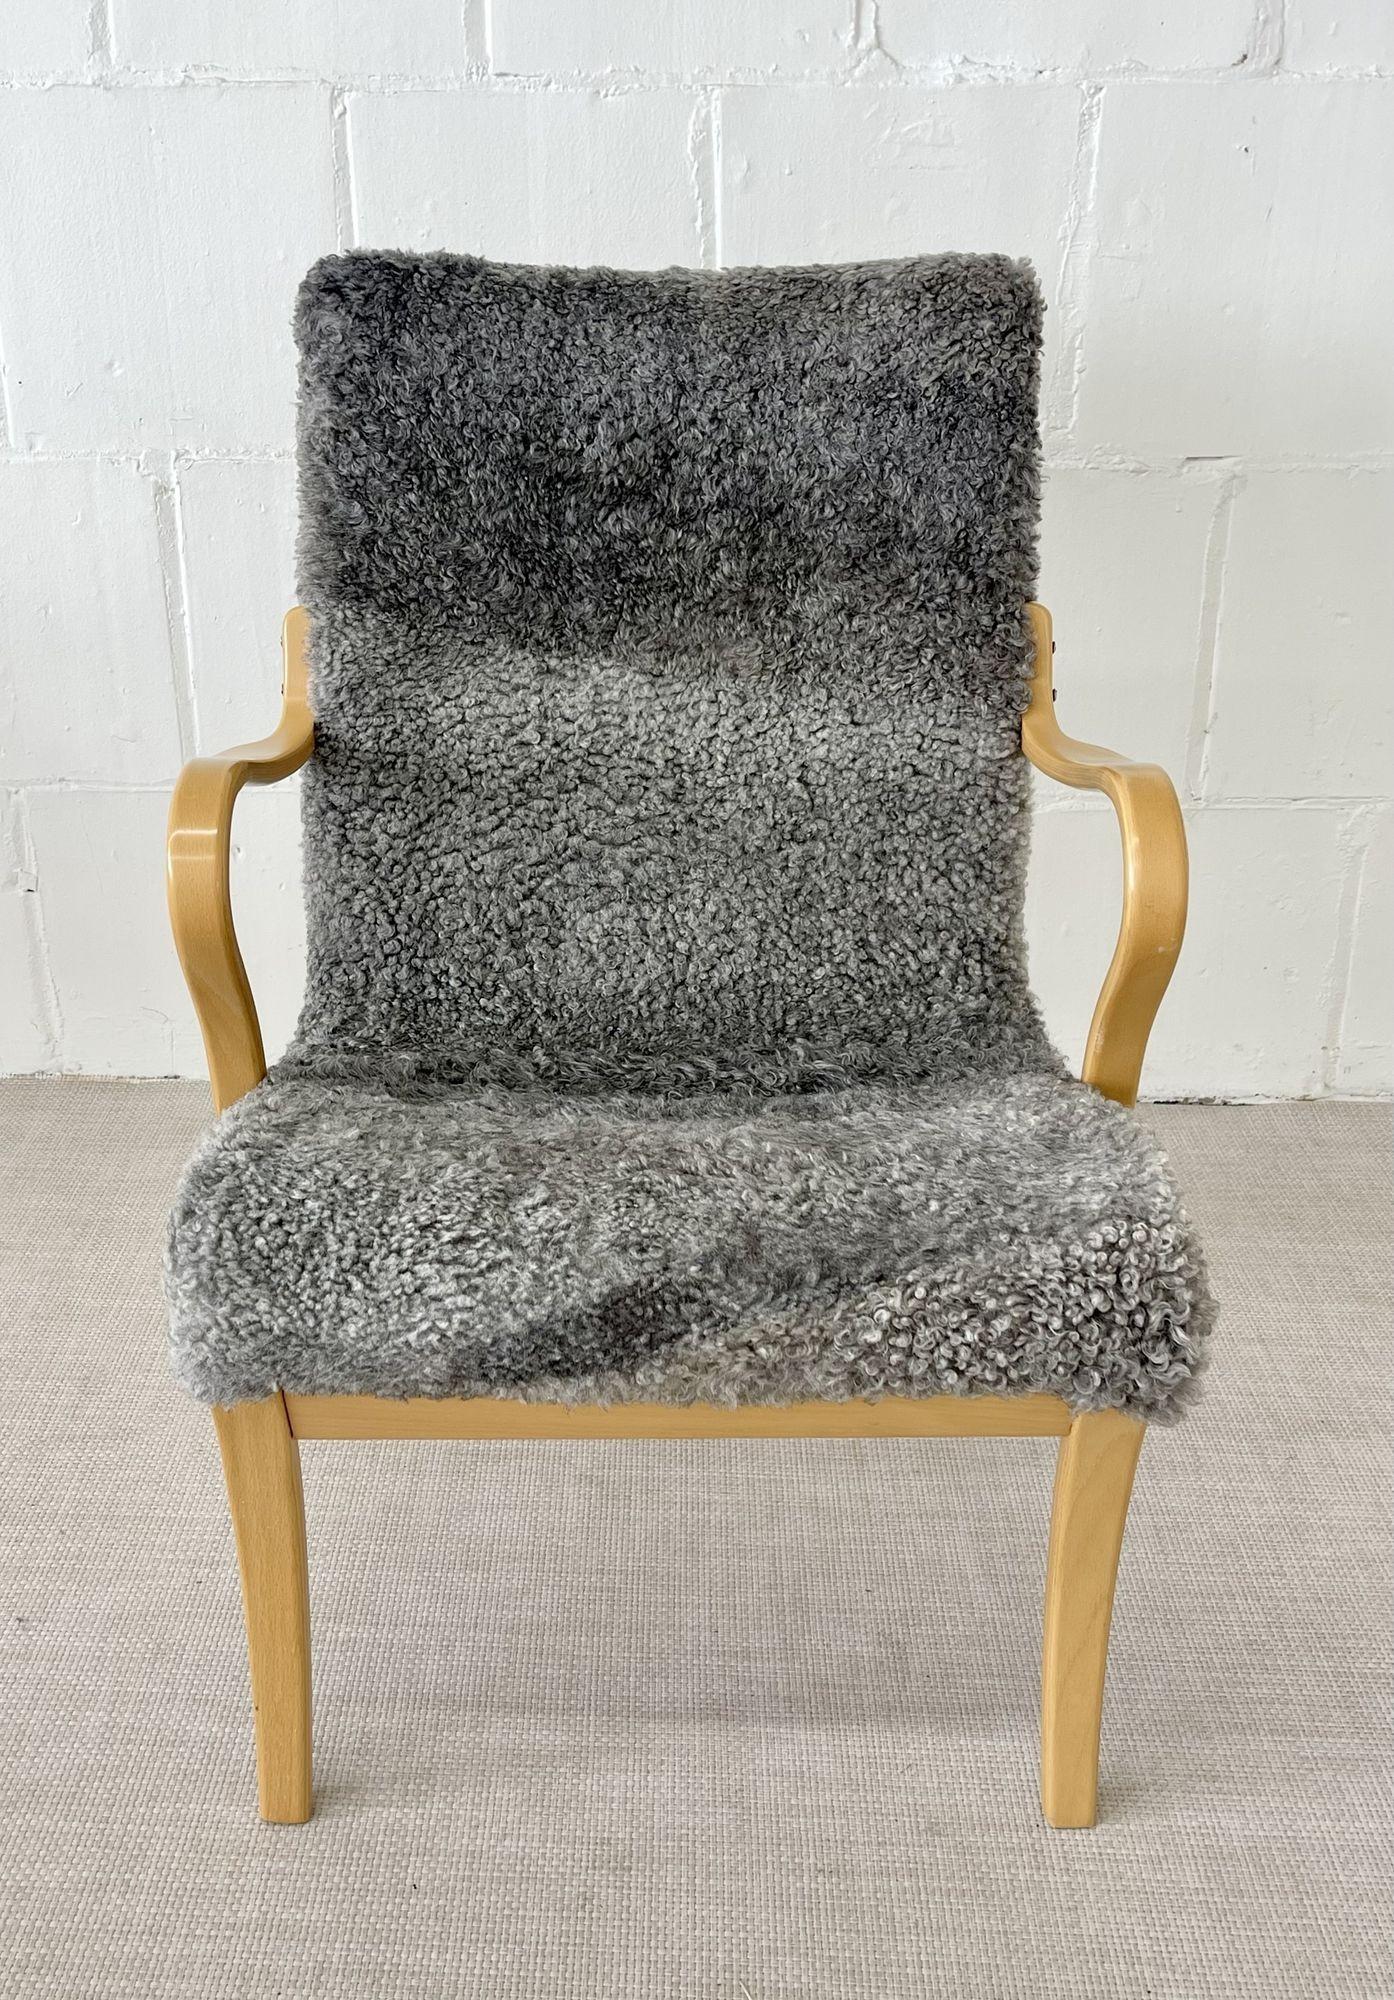 Mid-Century Modern 'Mina' lounge / arm chair stamped Bruno Mathsson, Sweden, 1950s
 
Iconic Mid-Century seating in later sheepskin over textile upholstery. Manufactured and burn mark stamped by Bruno Mathsson International in Sweden in the 1950s. 
